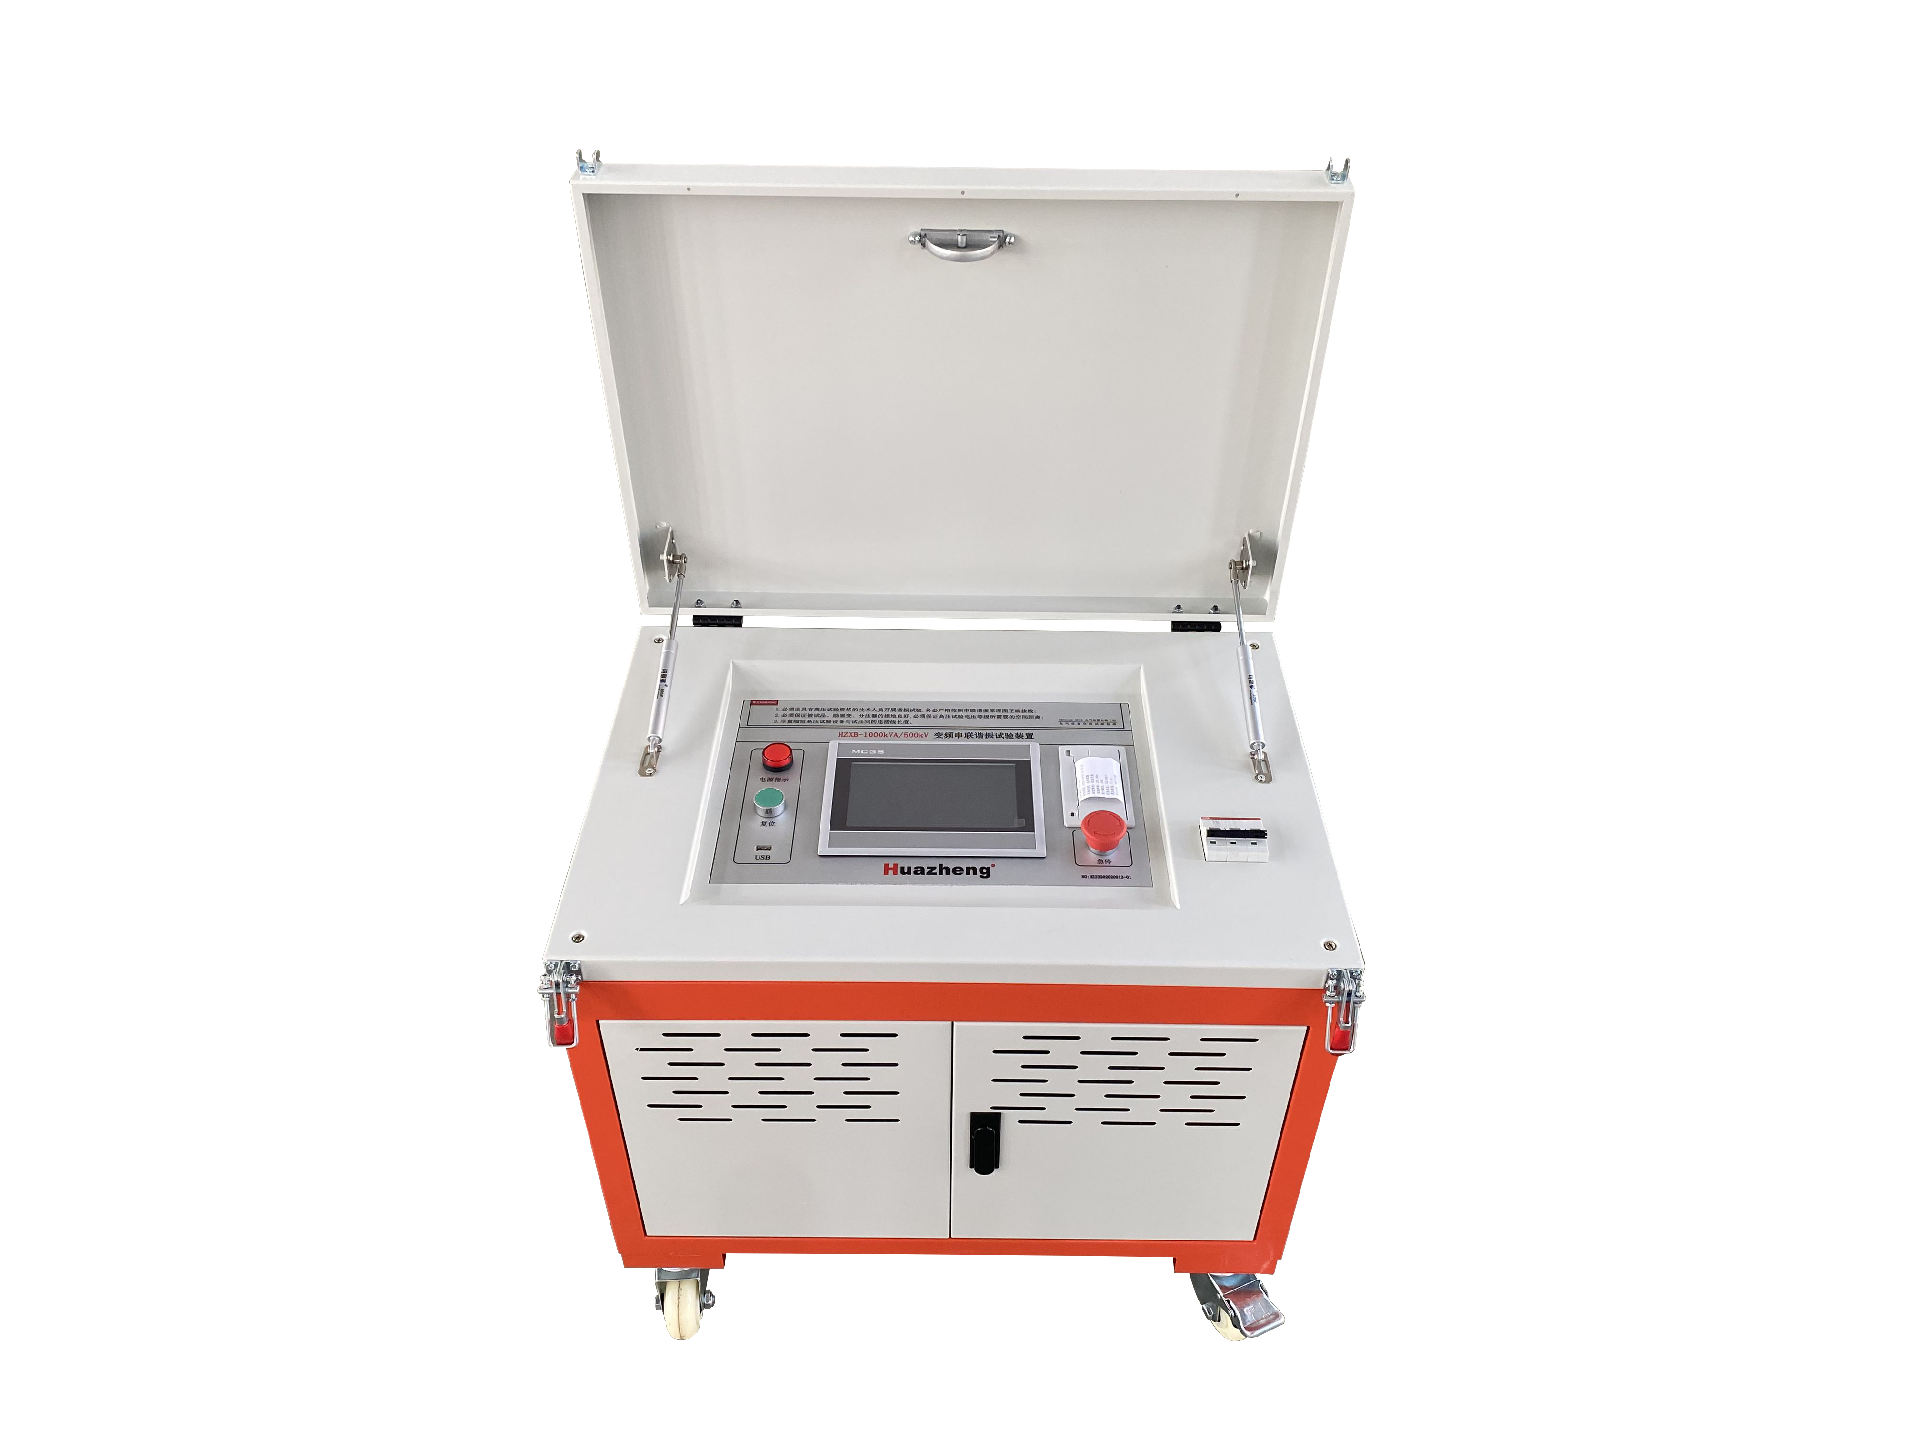 HZXB-1000kVA/500kV Variable Frequency Series Resonance Test Device